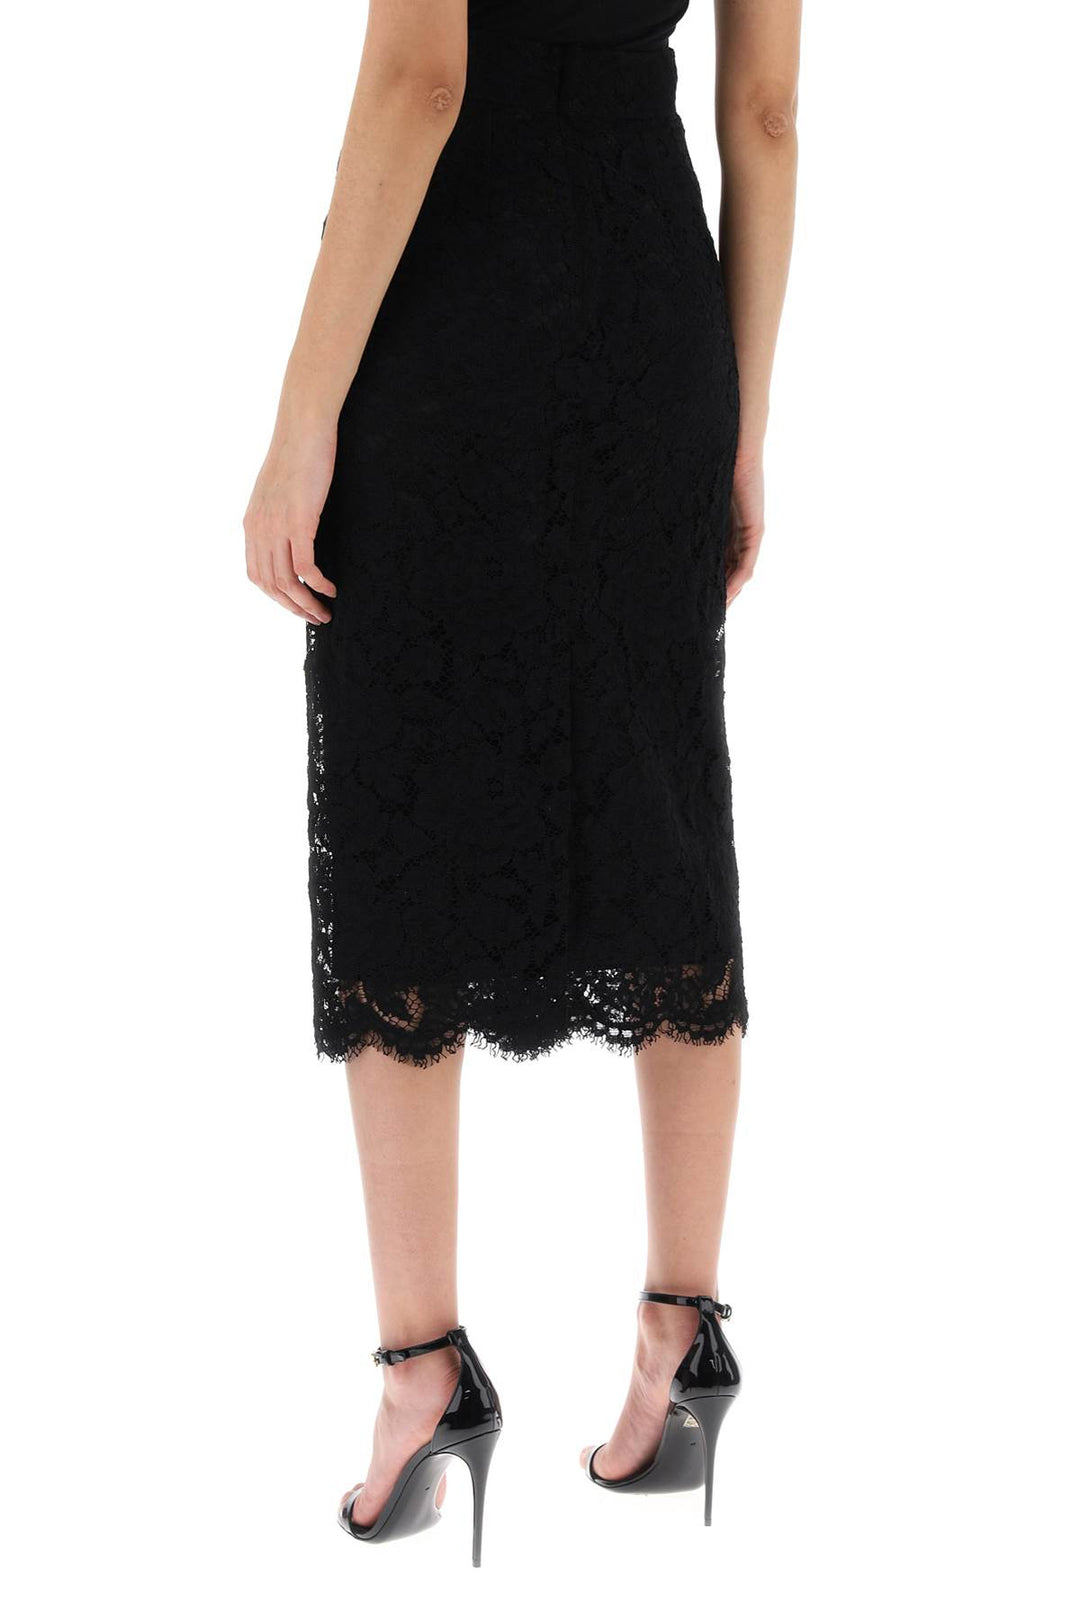 Dolce & Gabbana Lace Pencil Skirt With Tube Silhouette   Nero